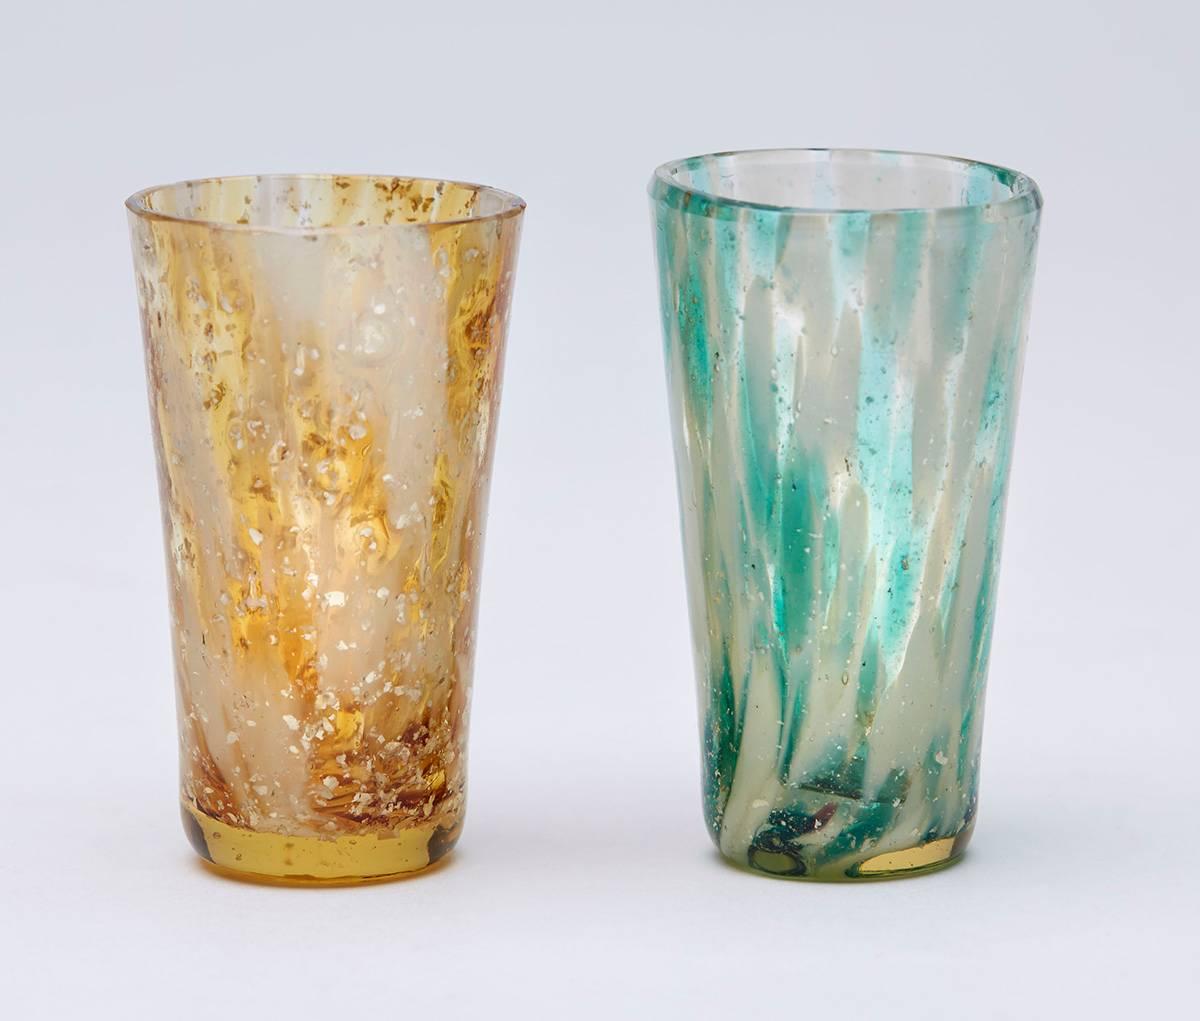 A scare and unusual set six Bohemian miniature tumbler shaped spirit glasses each with a white and colored spatter designs with fine Mica inclusions believed to be made at Kralik. With a slight tint to the glass bodies, the glasses are not marked.